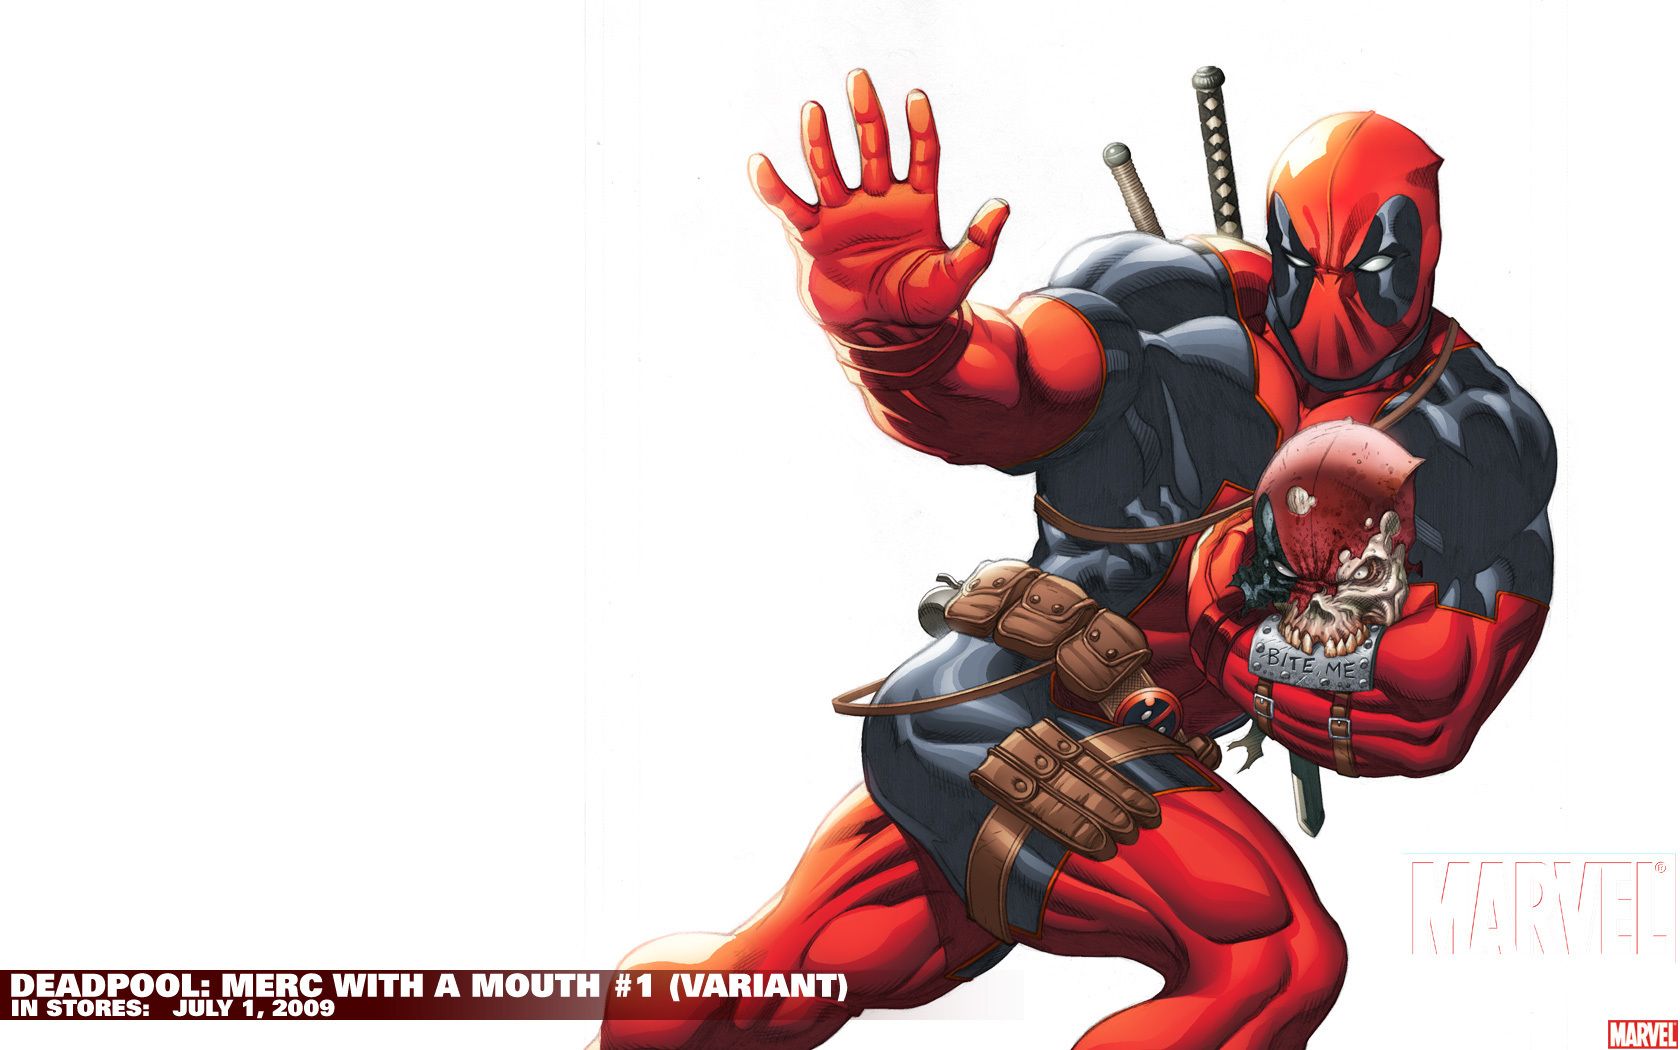 Download wallpaper from comics Deadpool: Merc With A Mouth with tags: Background, Windows, Windows Comic, Marvel Comics, Deadpool, Comics, macOS, Merc with a Mouth